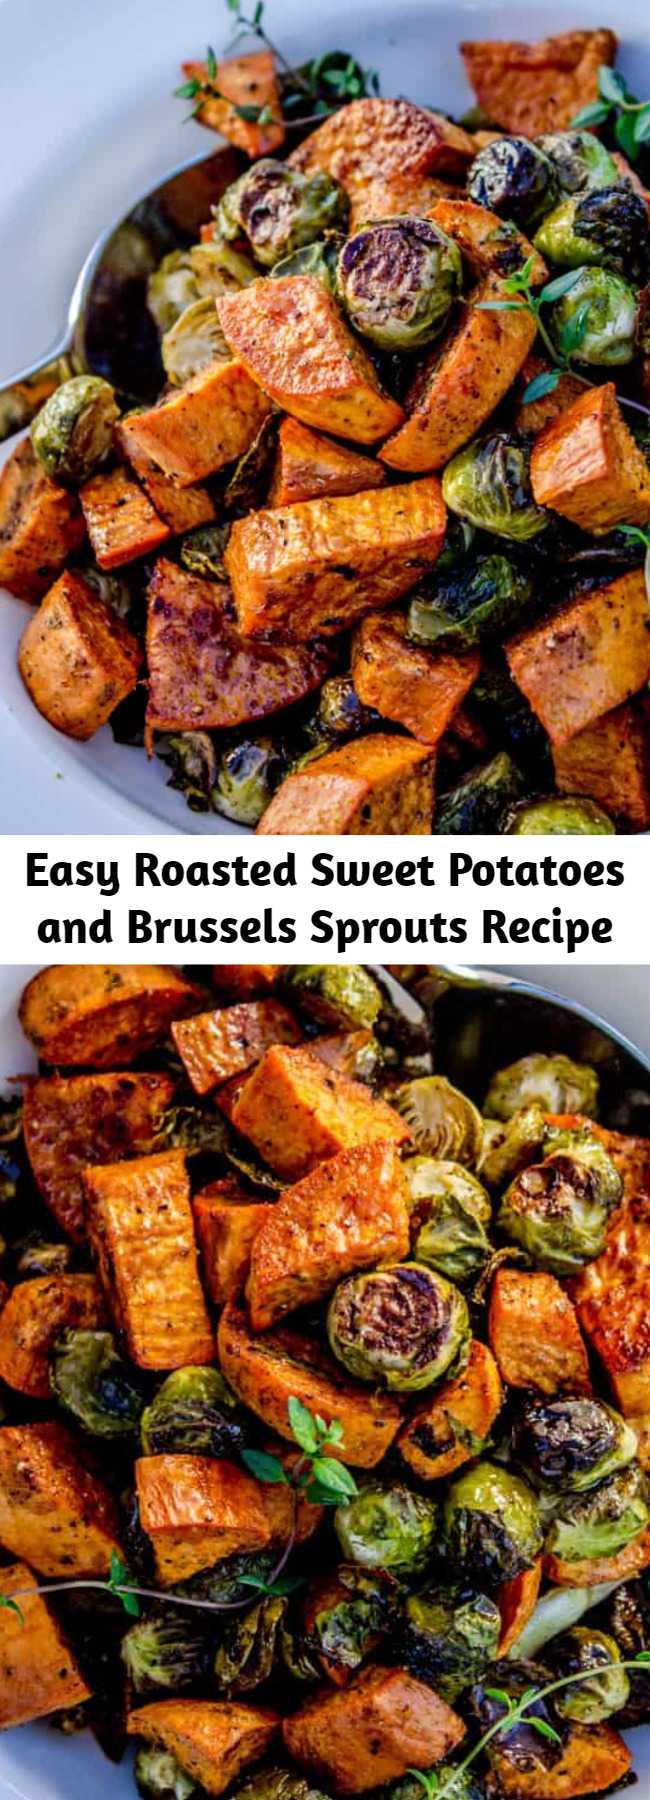 Easy Roasted Sweet Potatoes and Brussels Sprouts Recipe - Roasted vegetables (like these Brussels sprouts and sweet potatoes) are superior in almost every way; it’s a fact. But they take up valuable oven space on holidays. Make them ahead of time and reheat!  Save on time and stress. 